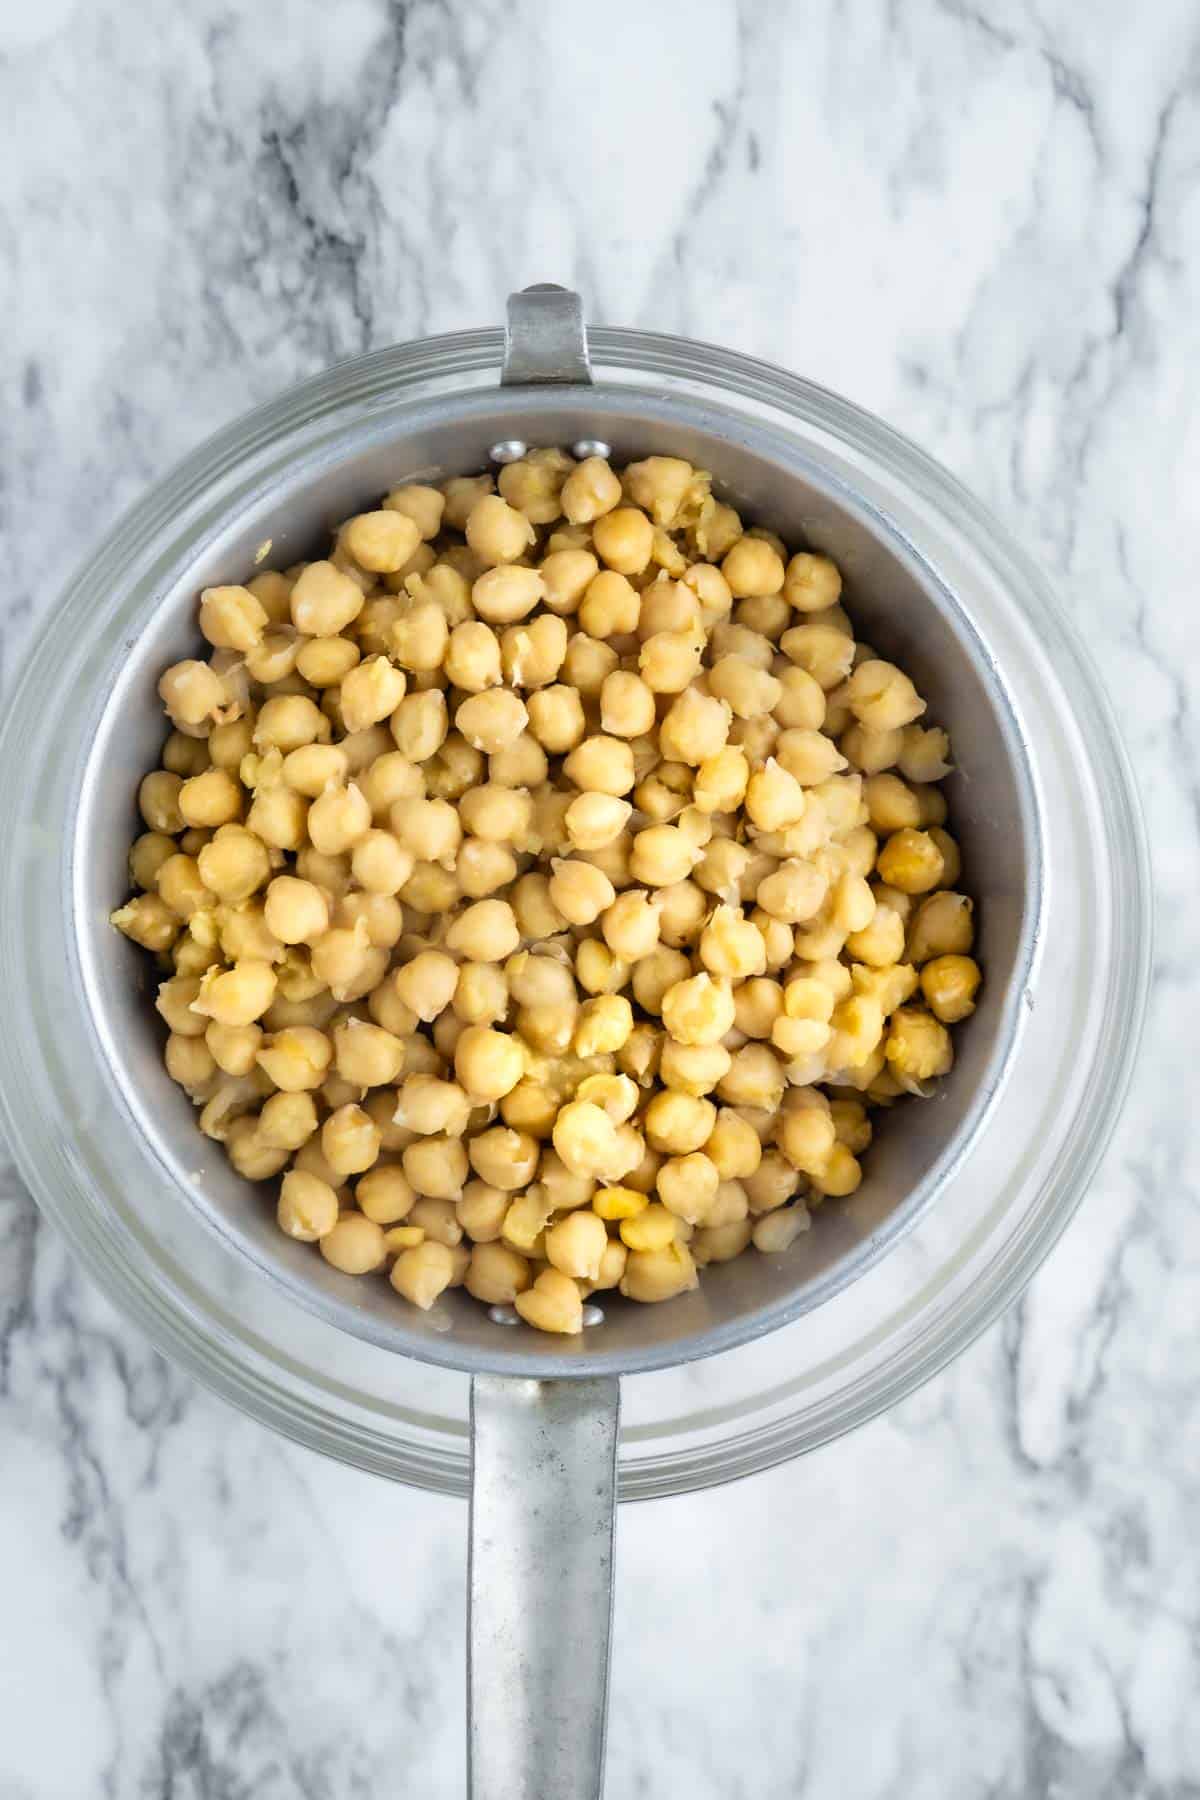 cooked chickpeas are drained in a colander over a glass mixing bowl